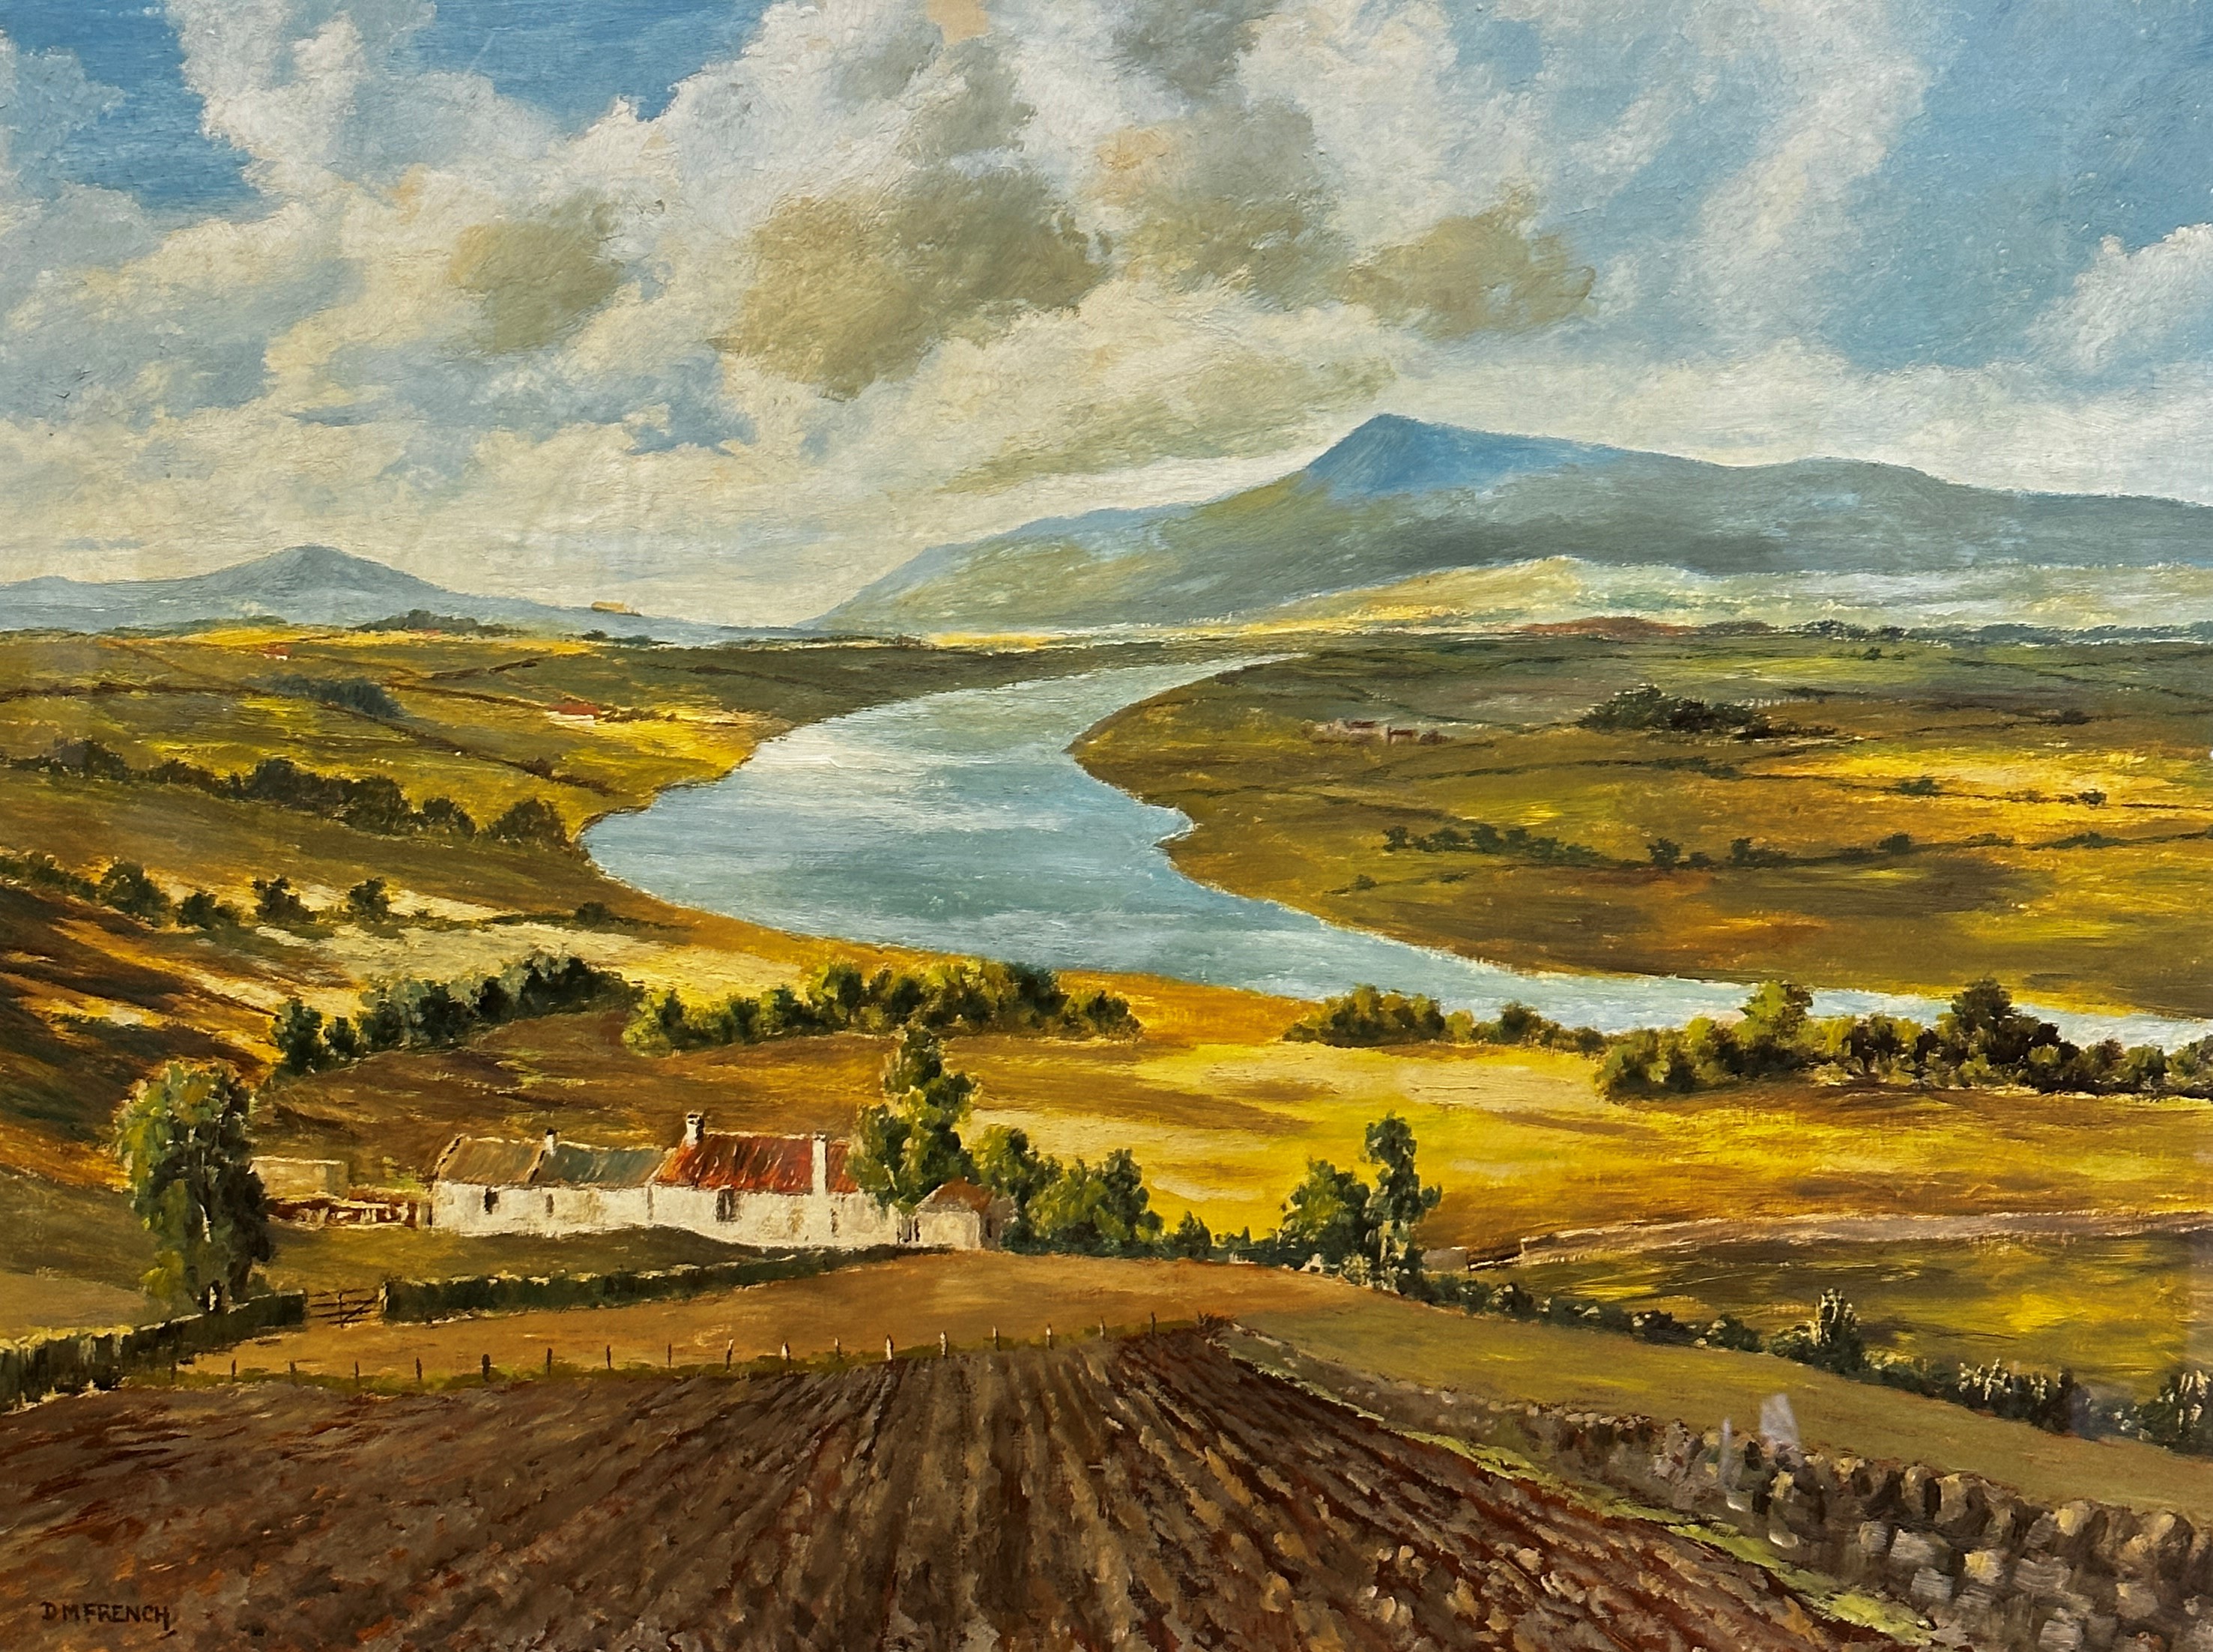 D M French, A View of the Tay, acrylic on board, signed lower left, (59cm x 76cm)